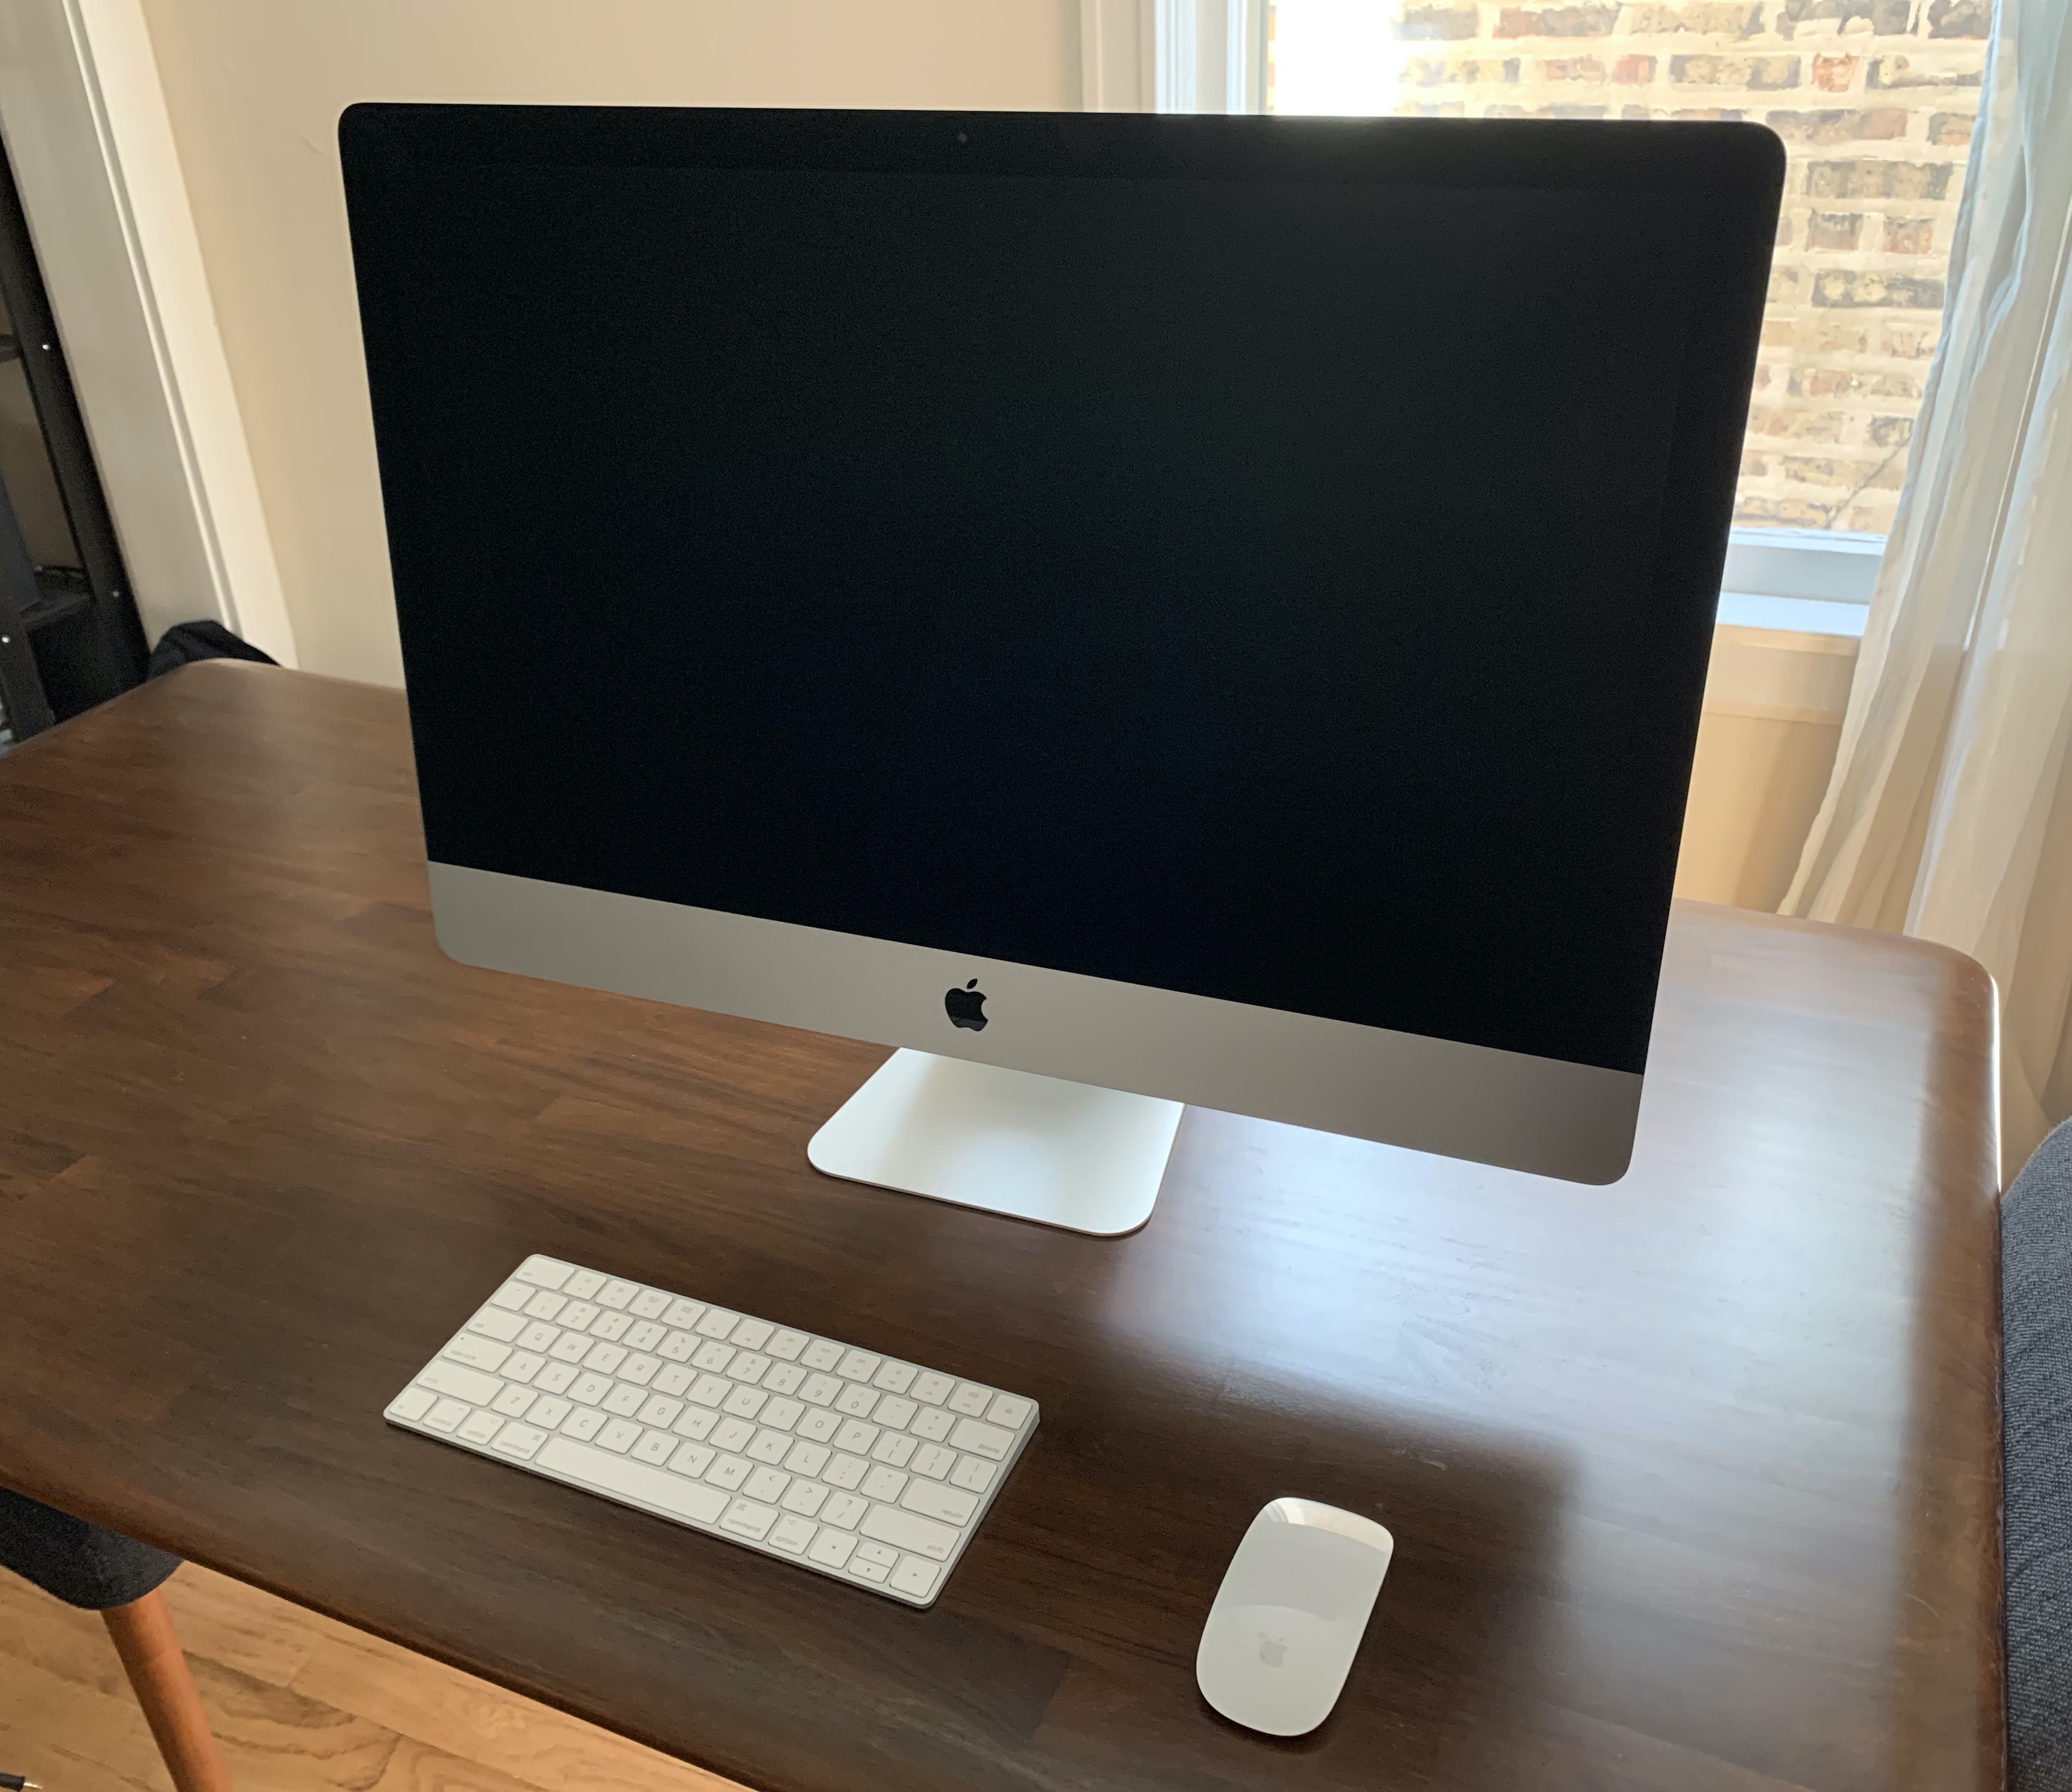 2020 27-inch iMac review: A classic Mac for the end of an era